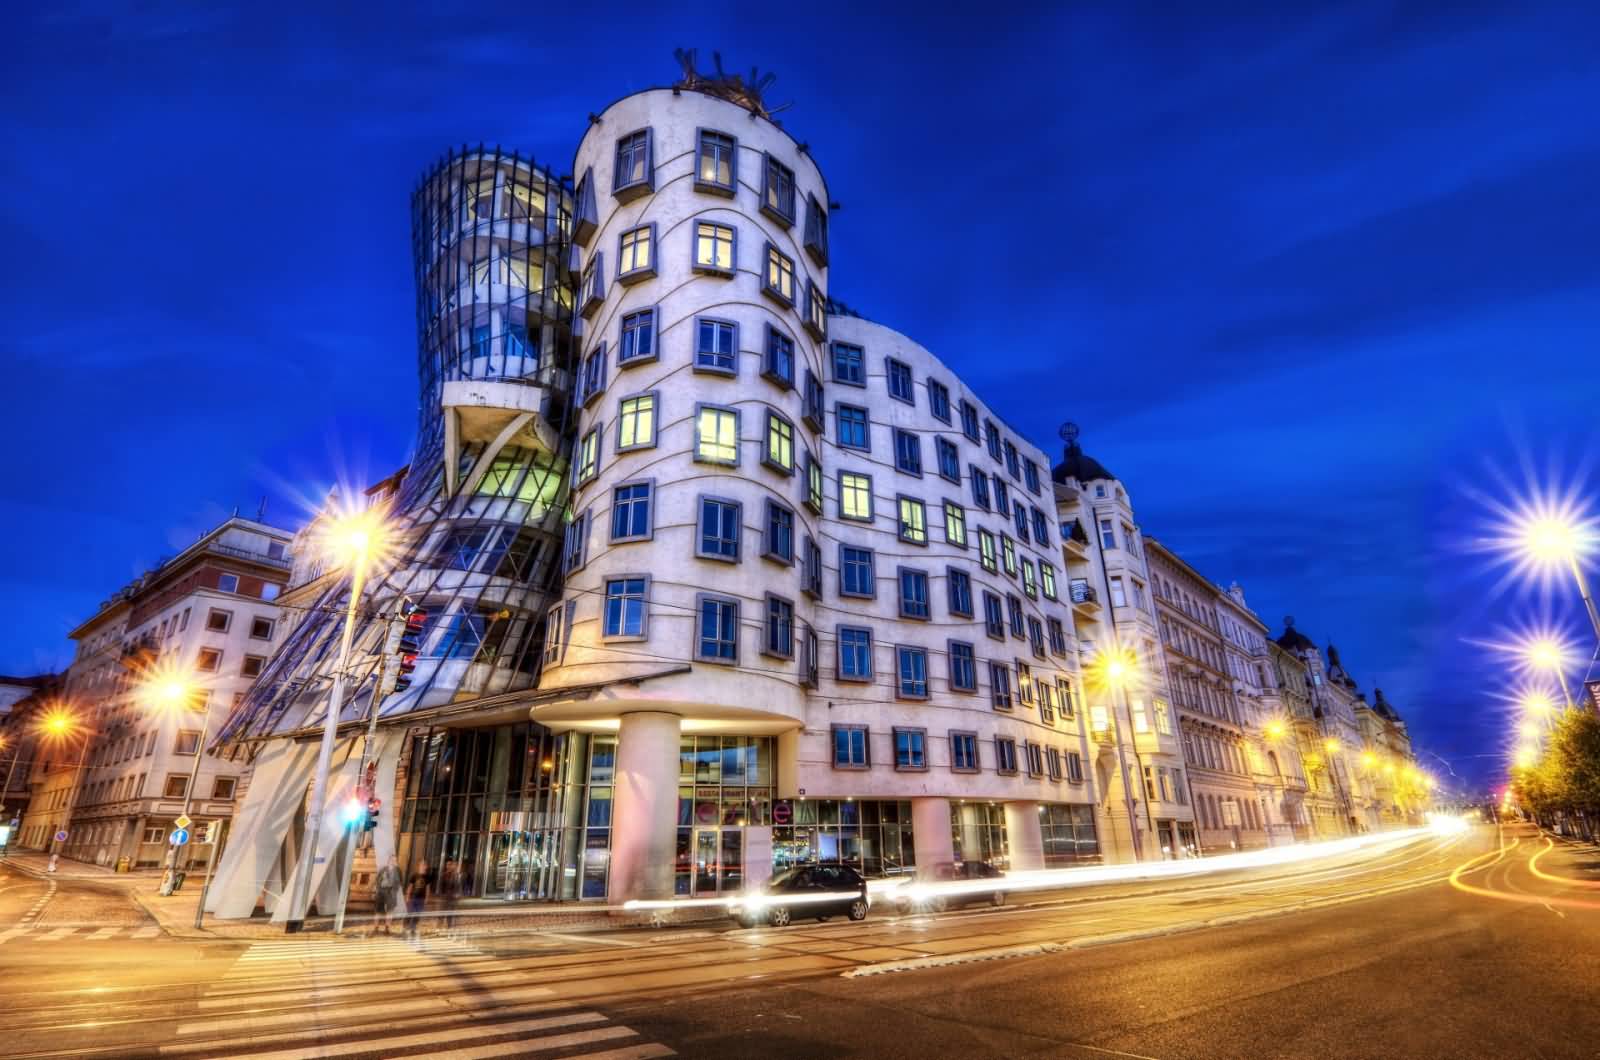 The Dancing House At Dusk With Traffic Lights